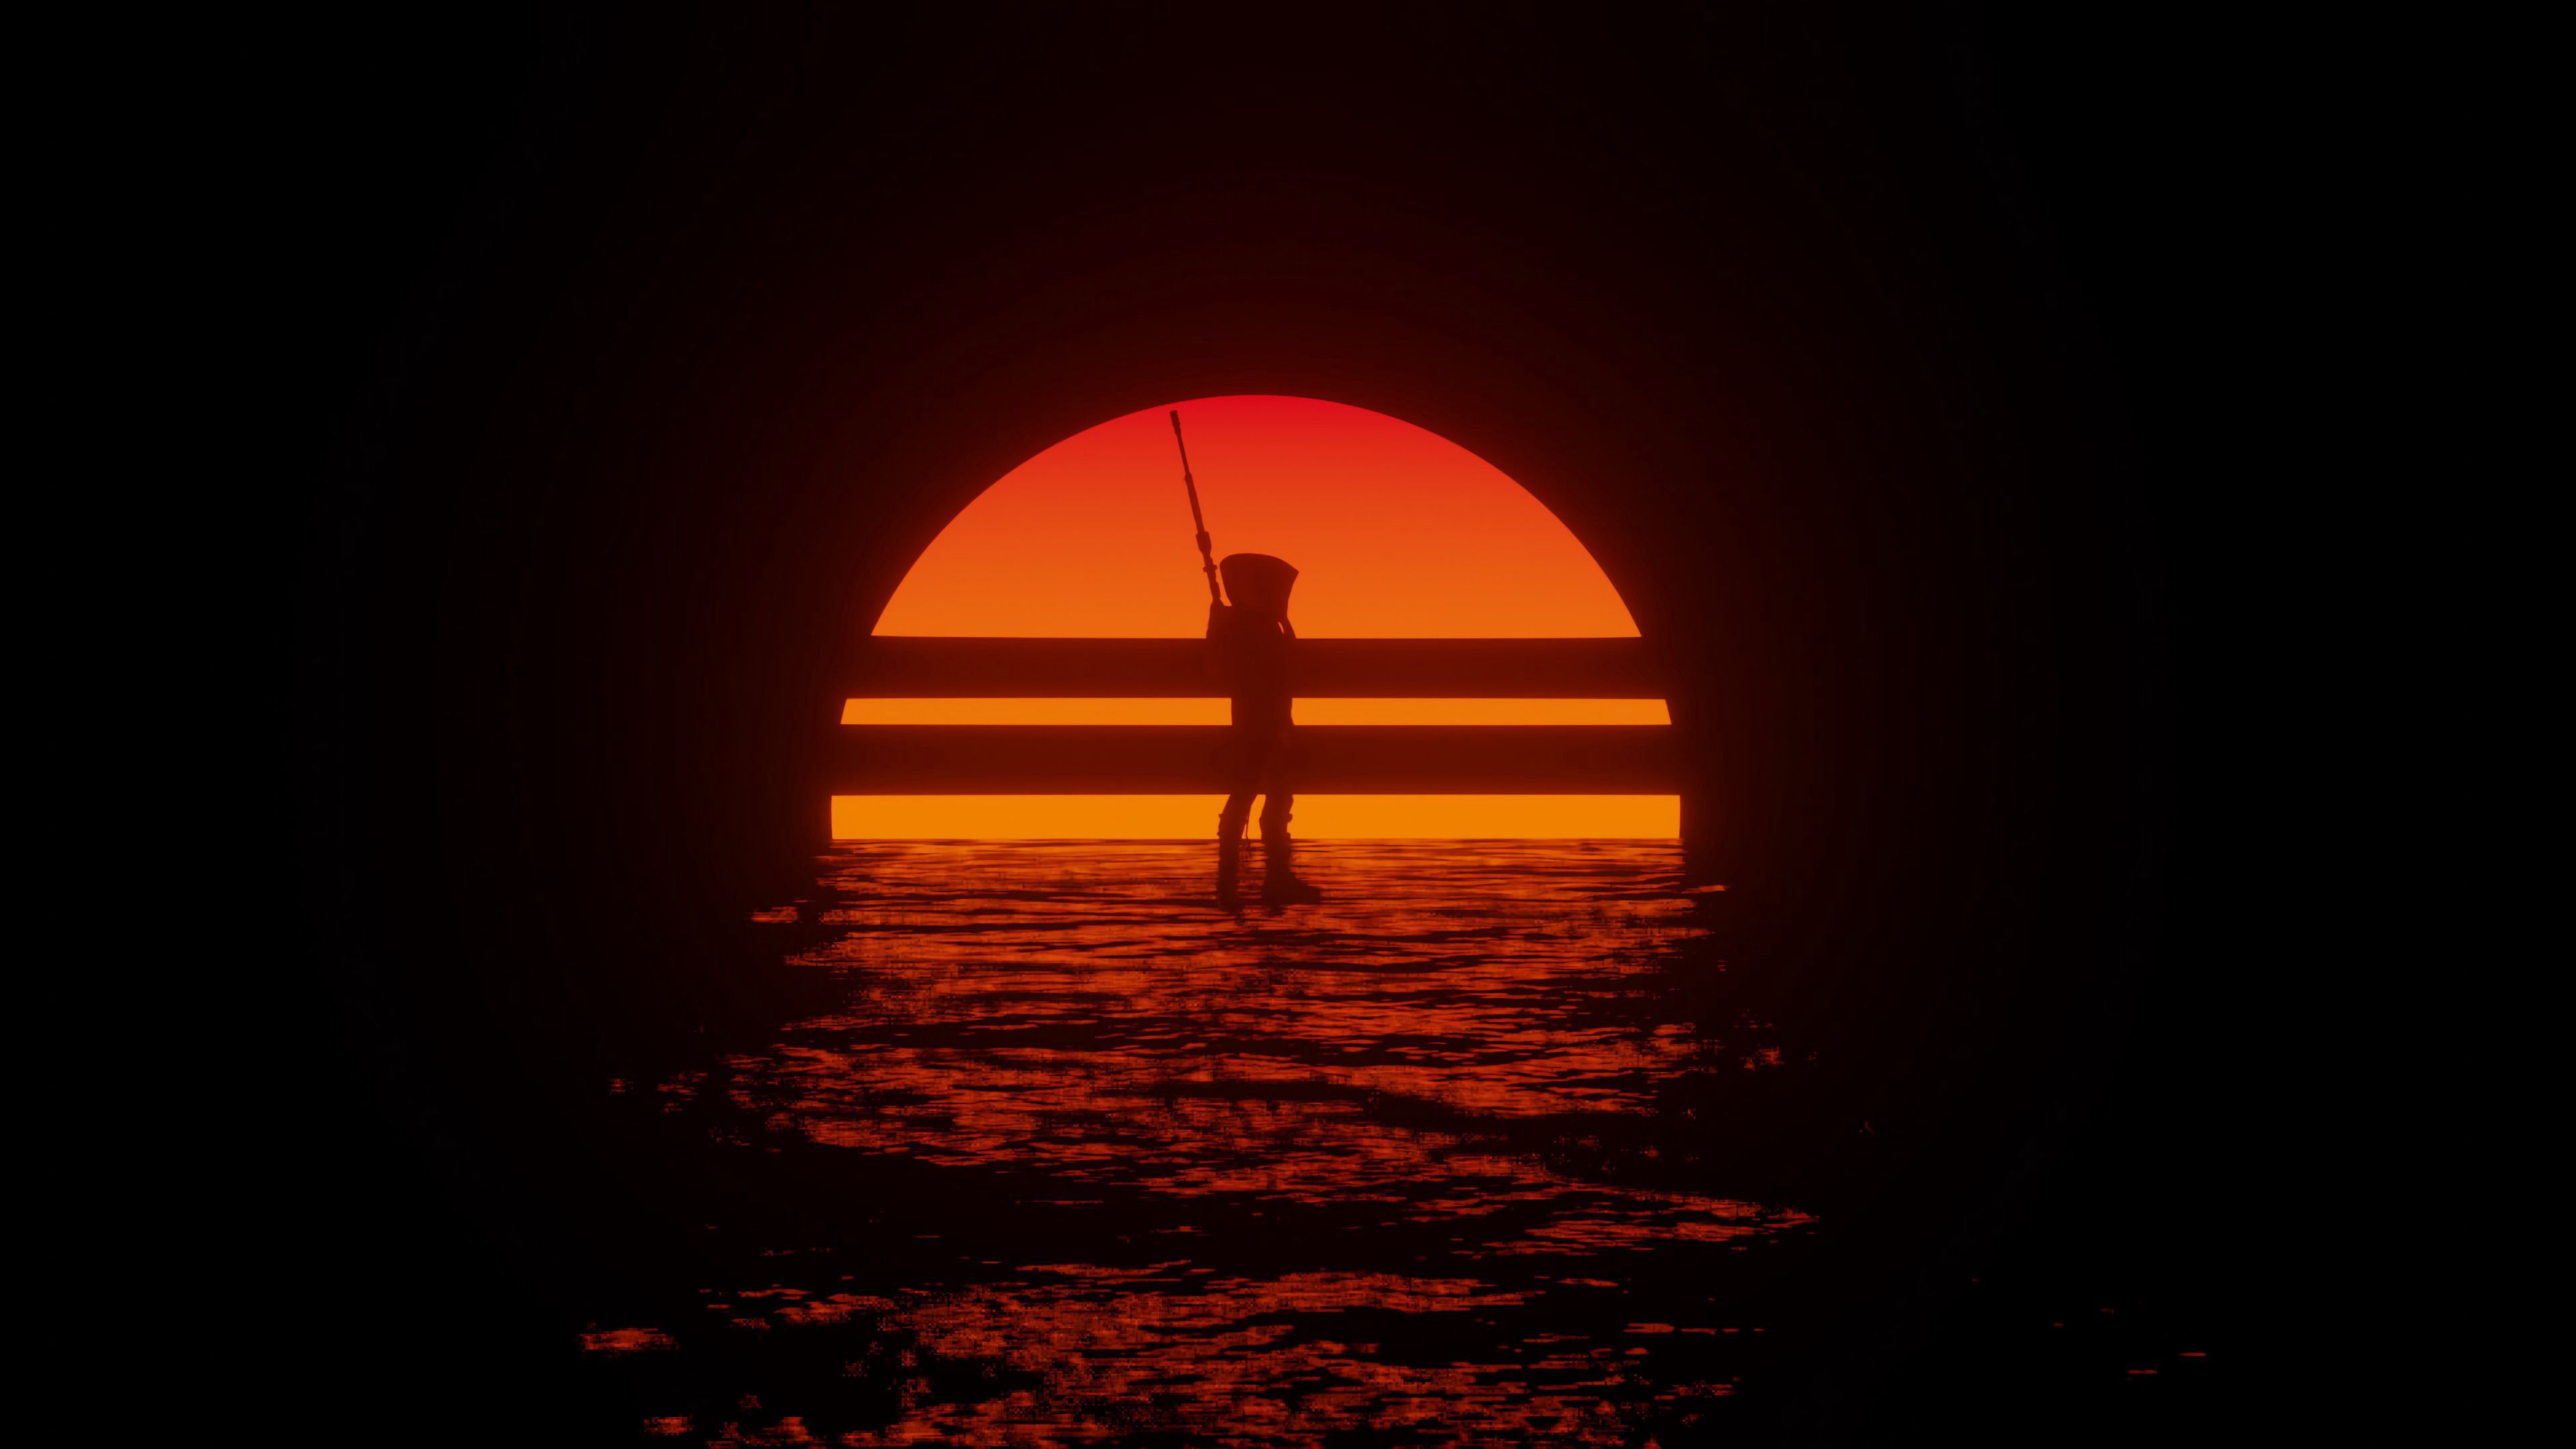 113225 Screensavers and Wallpapers Cyborg for phone. Download sunset, art, silhouette, cyborg pictures for free